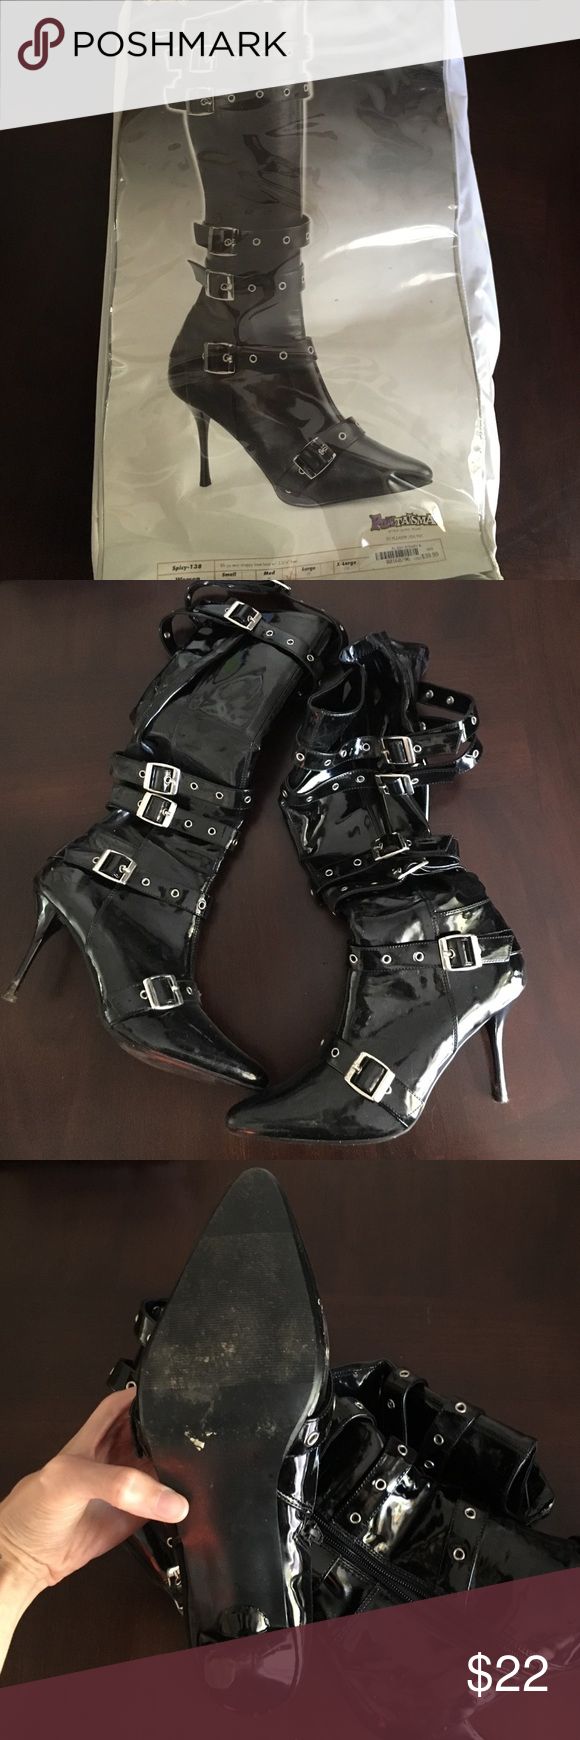 halloween spicy strappy knee high pleather boots halloween costume boots the packaging says spicy black